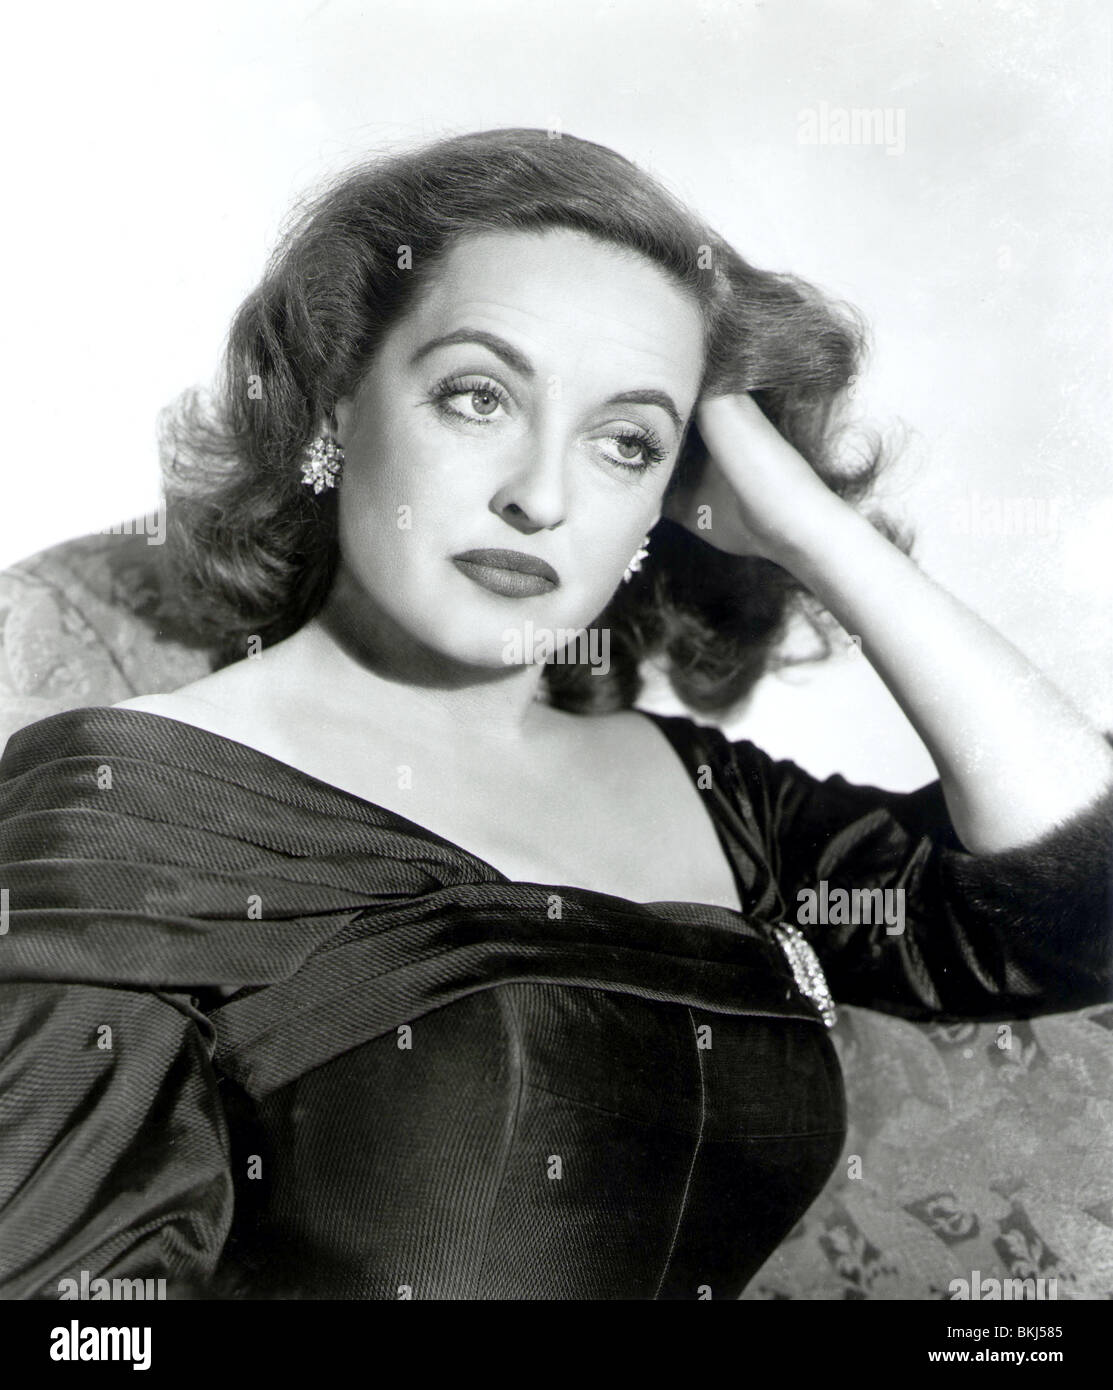 ALL ABOUT EVE (1950) BETTE DAVIS AAE 018 P Foto Stock